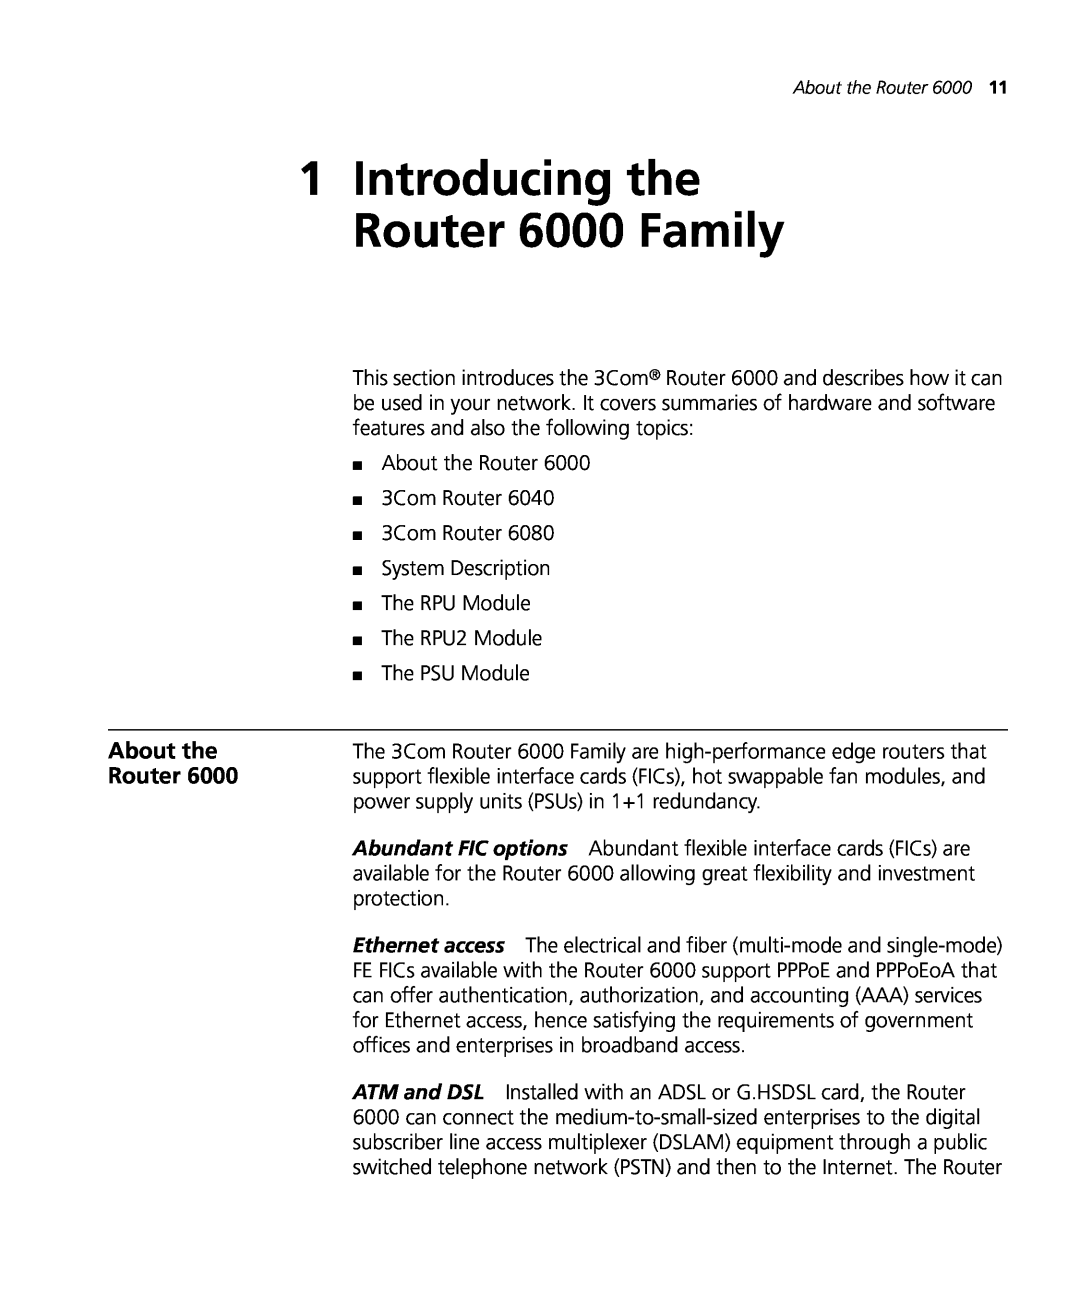 3Com manual About the, 1Introducing the Router 6000 Family 